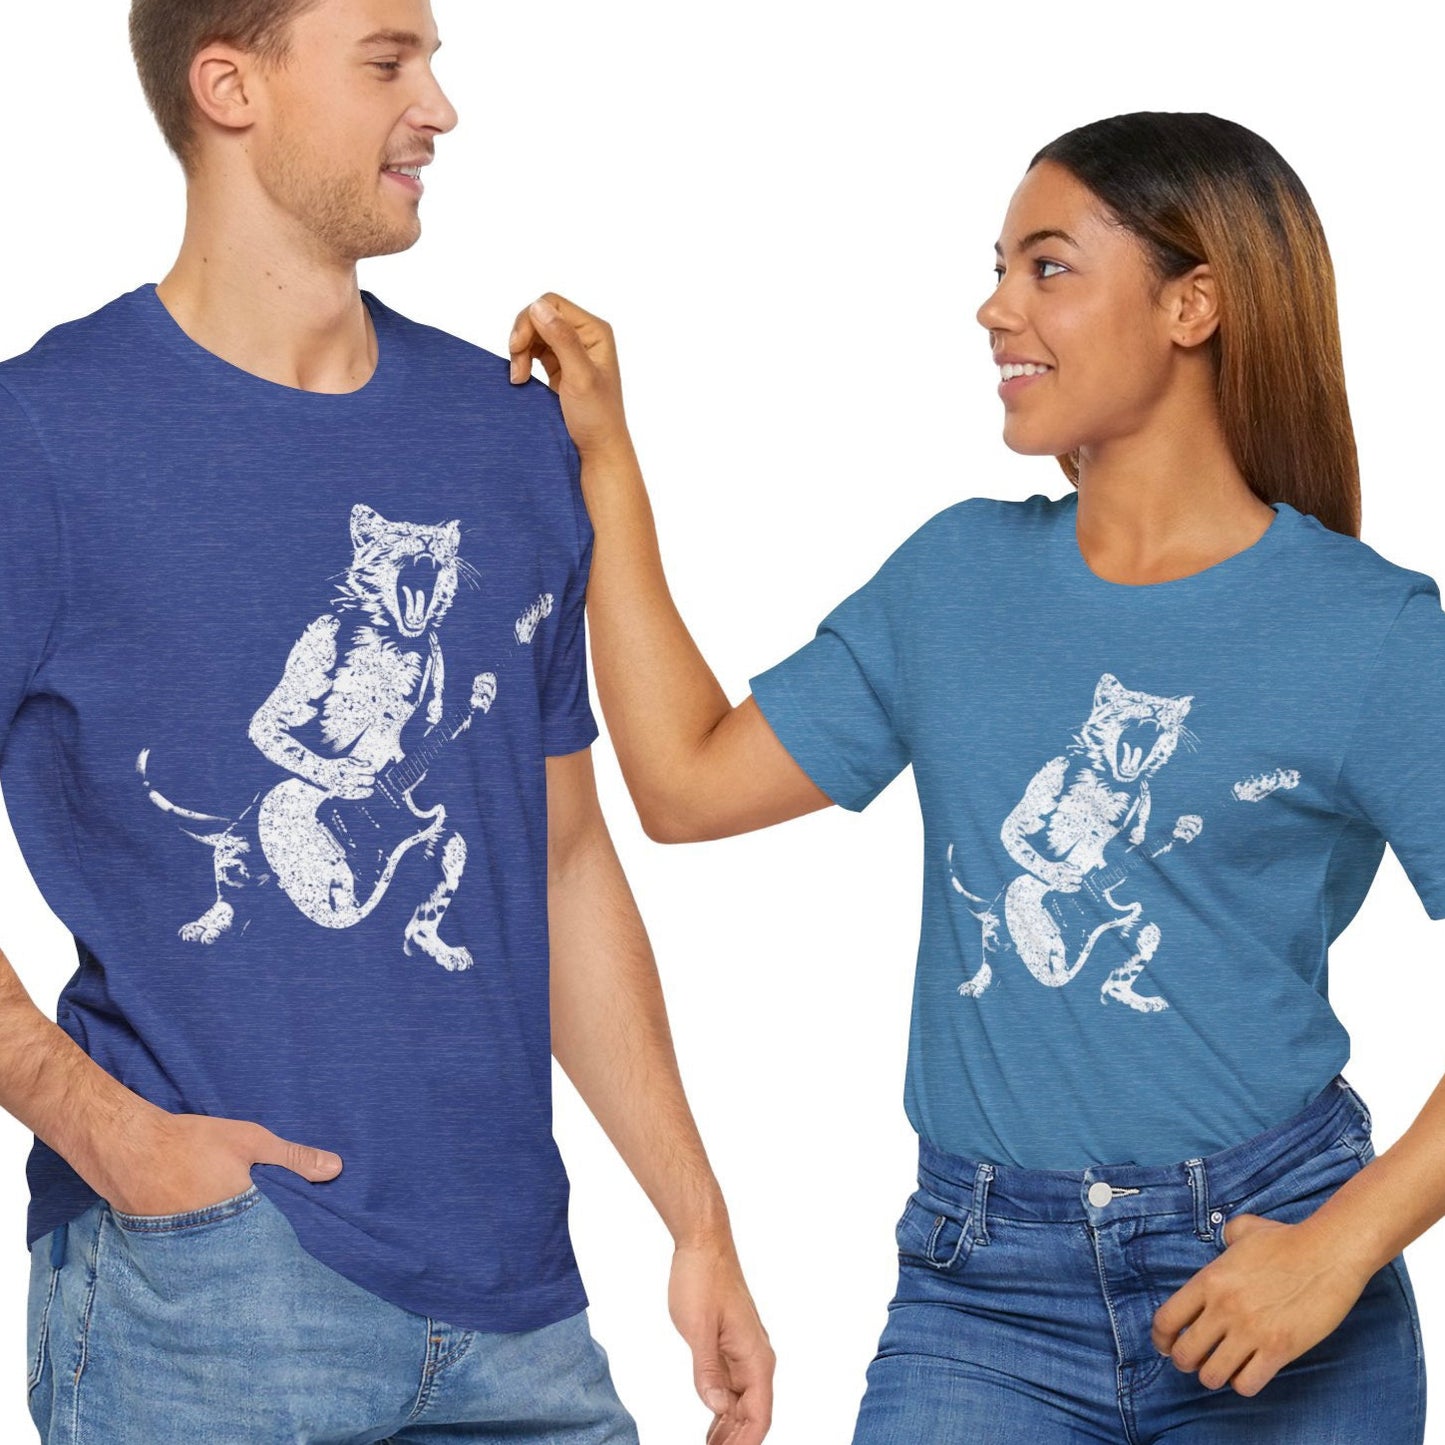 Rockin' Kitty Cat T-shirt, Funny Gift for Cat Lovers and Guitar players, Gift for Rock Fans and Musicians, Bella+Canvas 3001 Tee